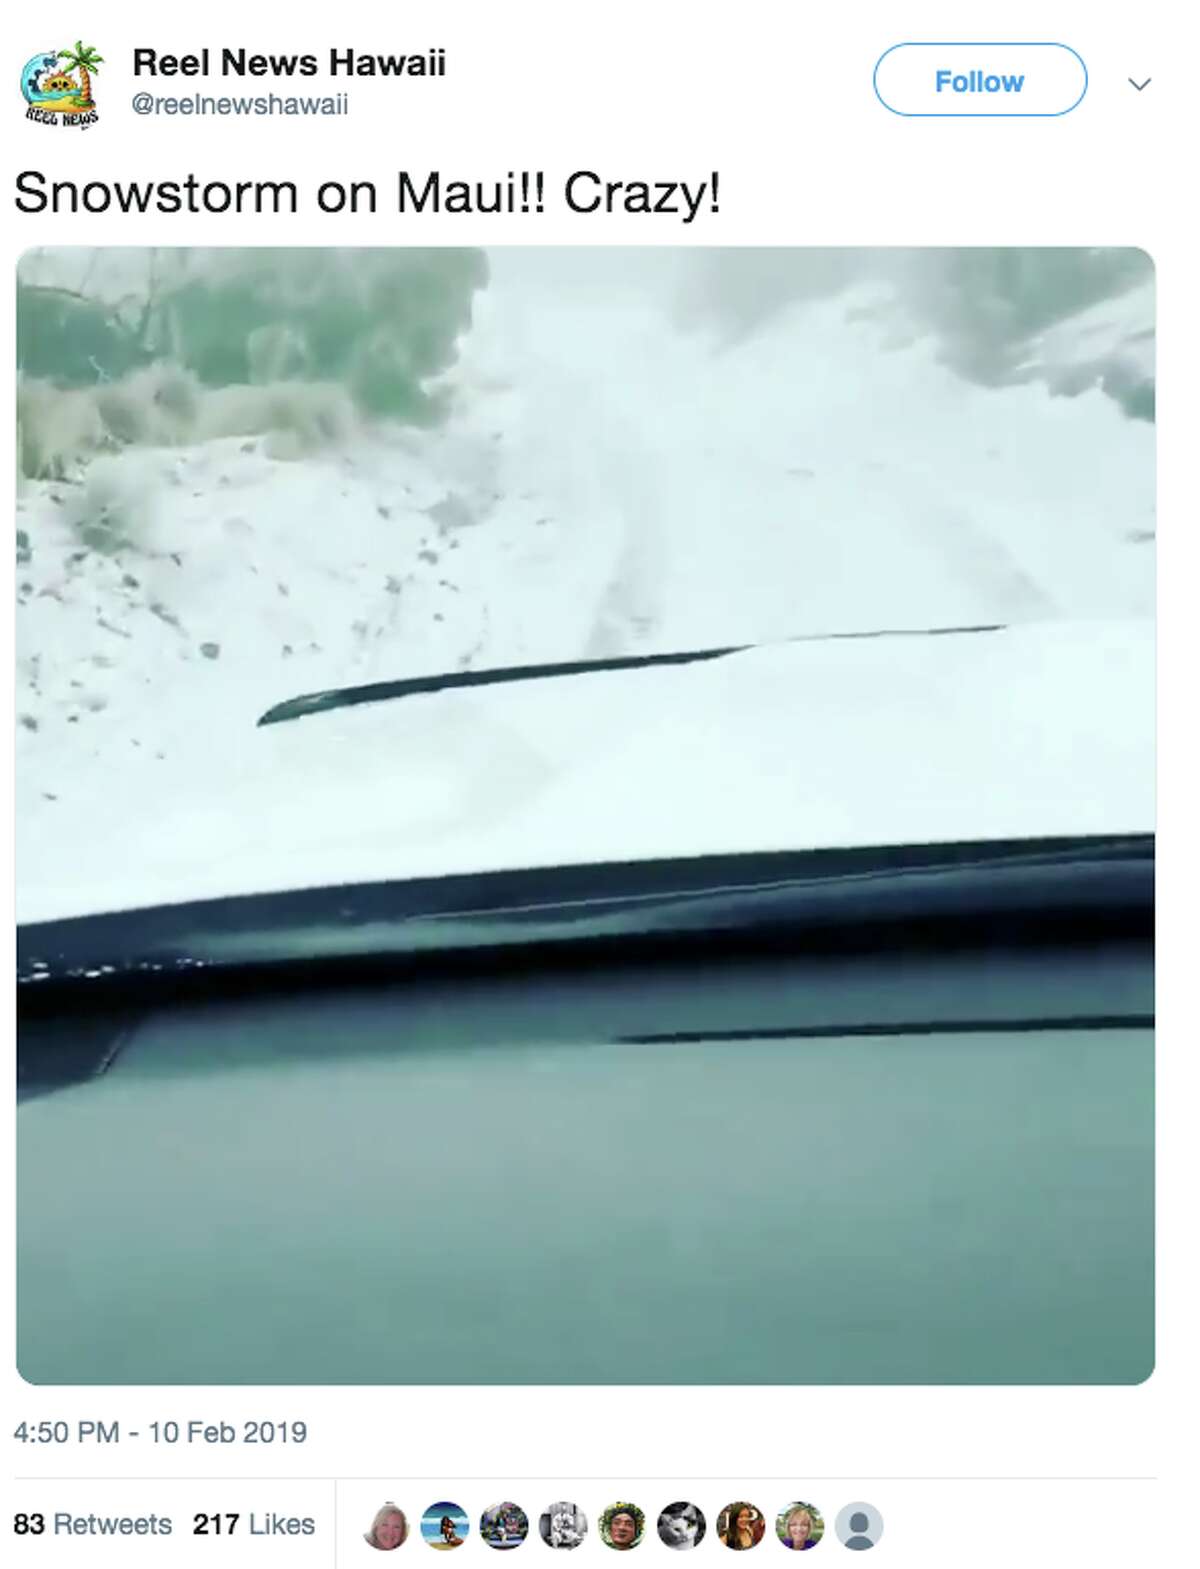 Reel News Hawaii posted a video of a motorist driving in snow on Haleakala at 10,000 feet on Maui.